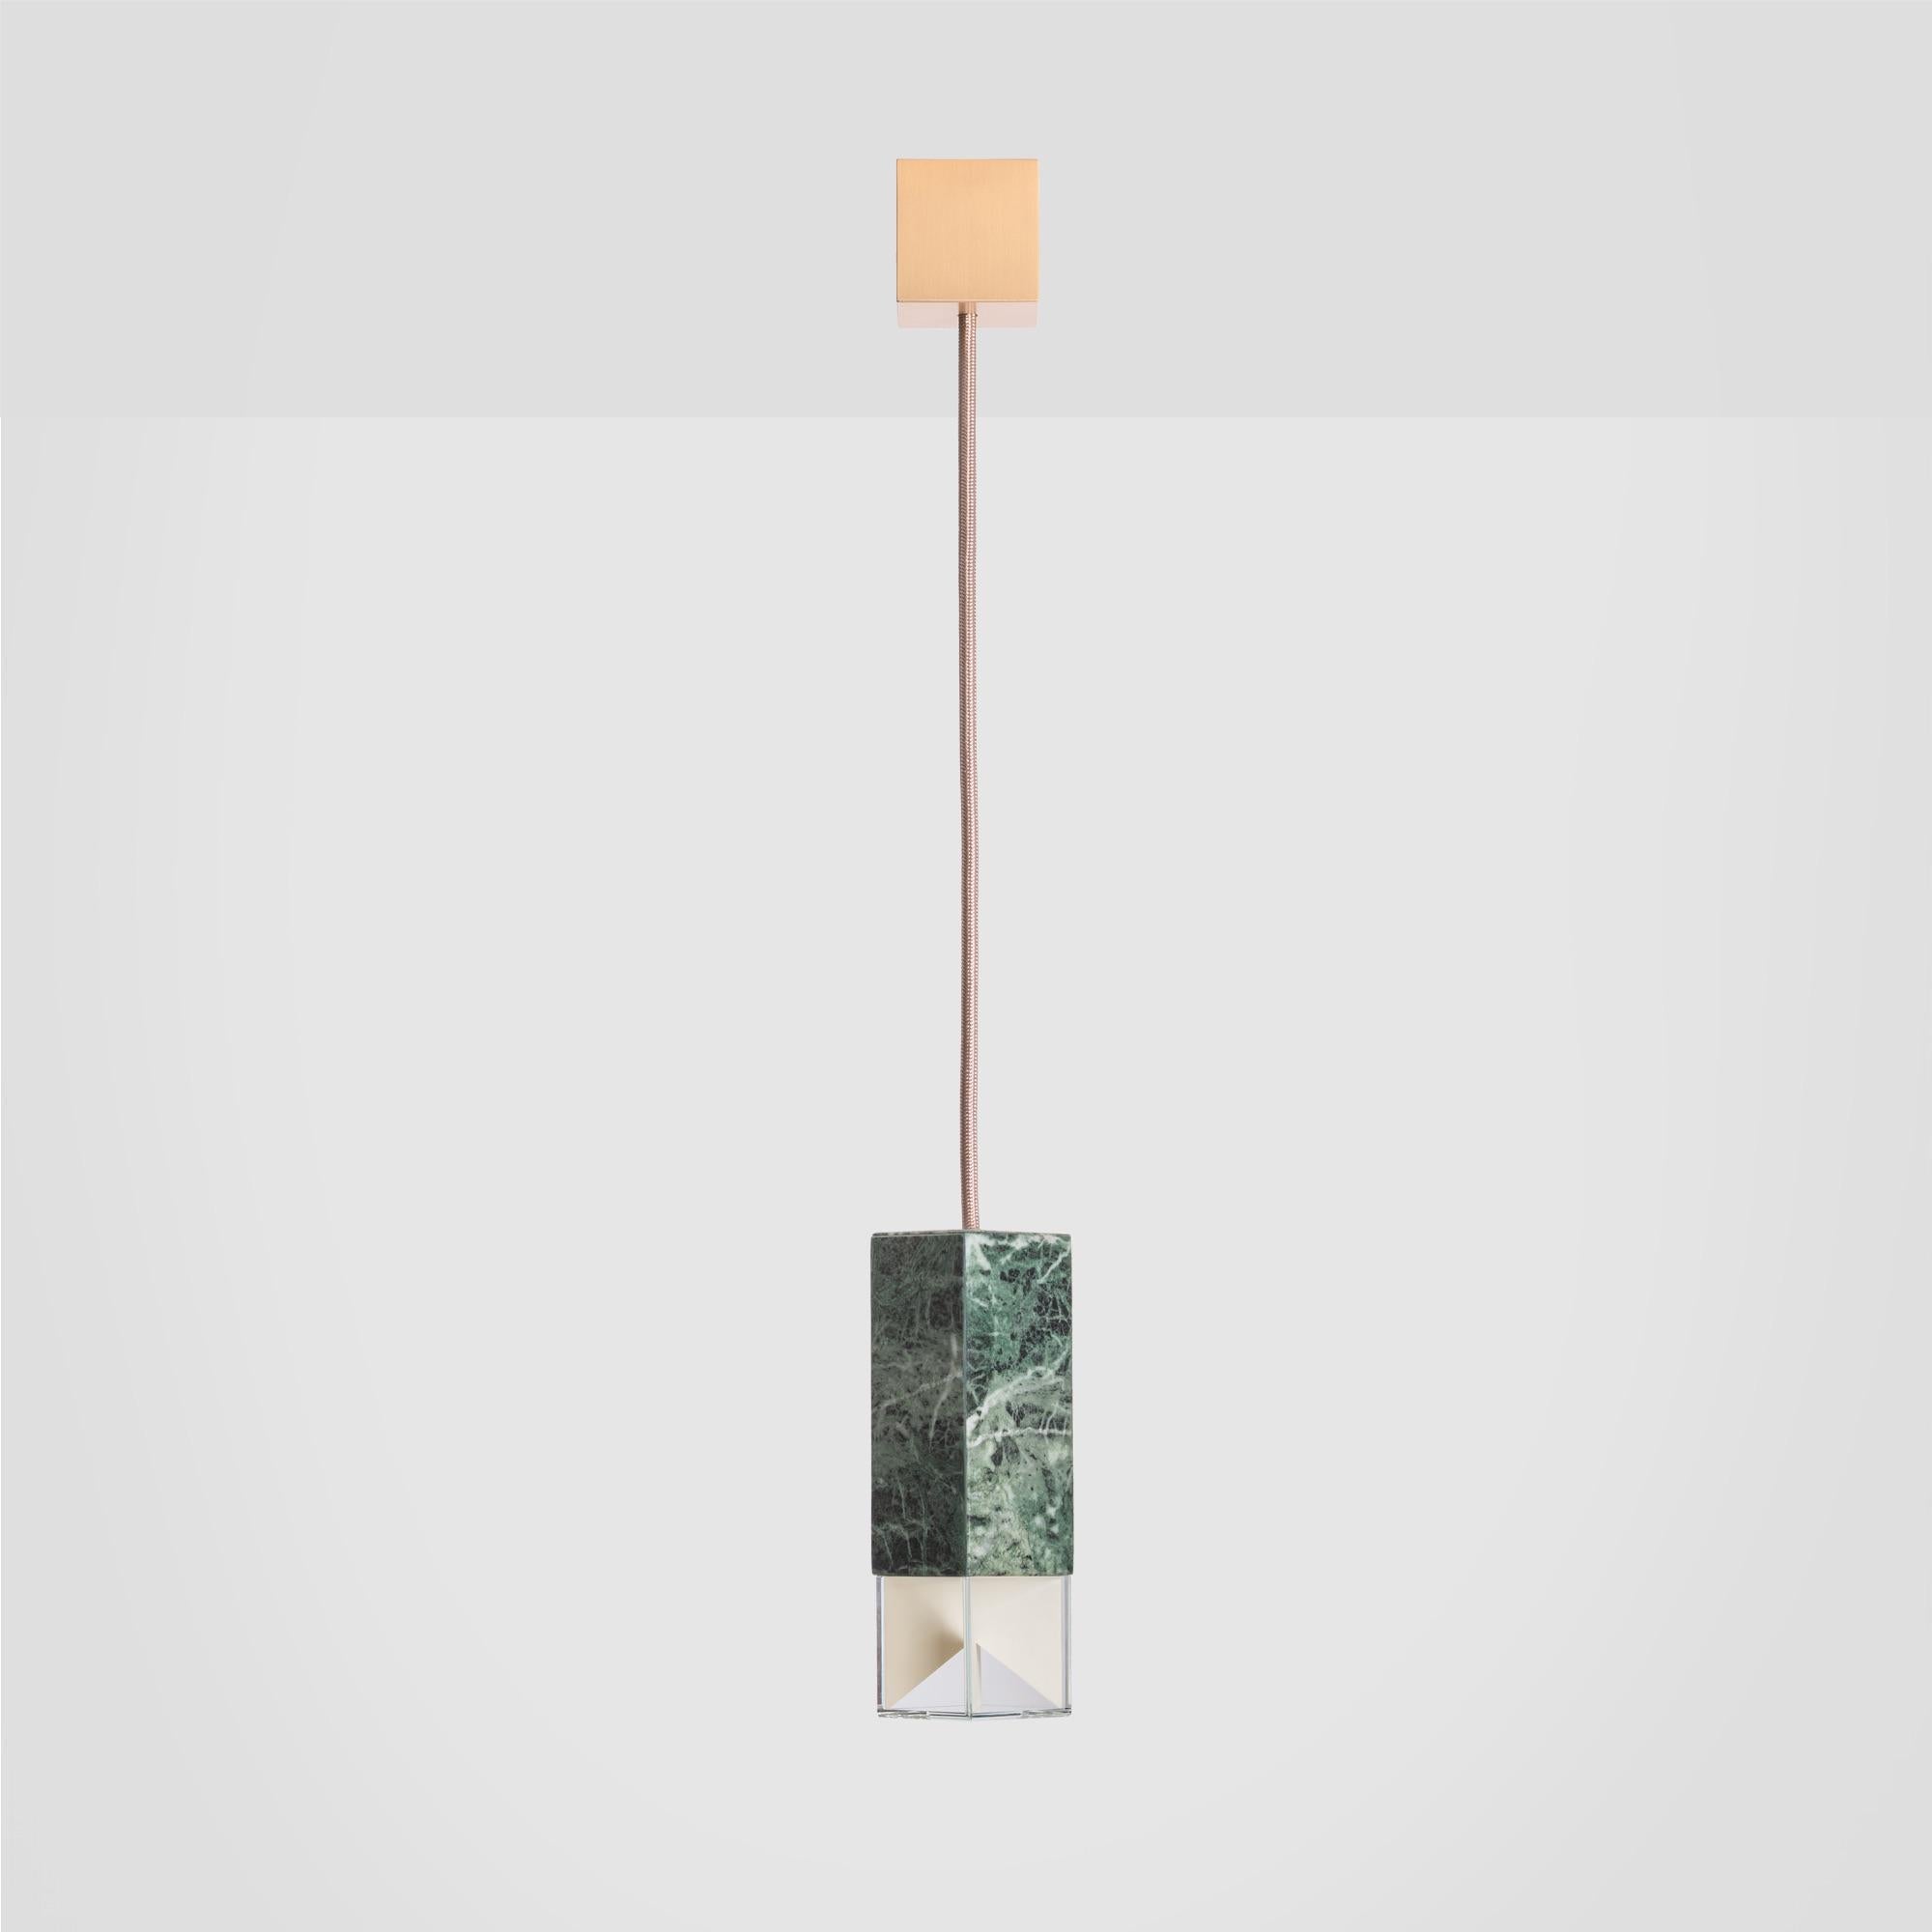 Porcelain Contemporary Pendant Light Handcrafted in Green Marble by Formaminima For Sale